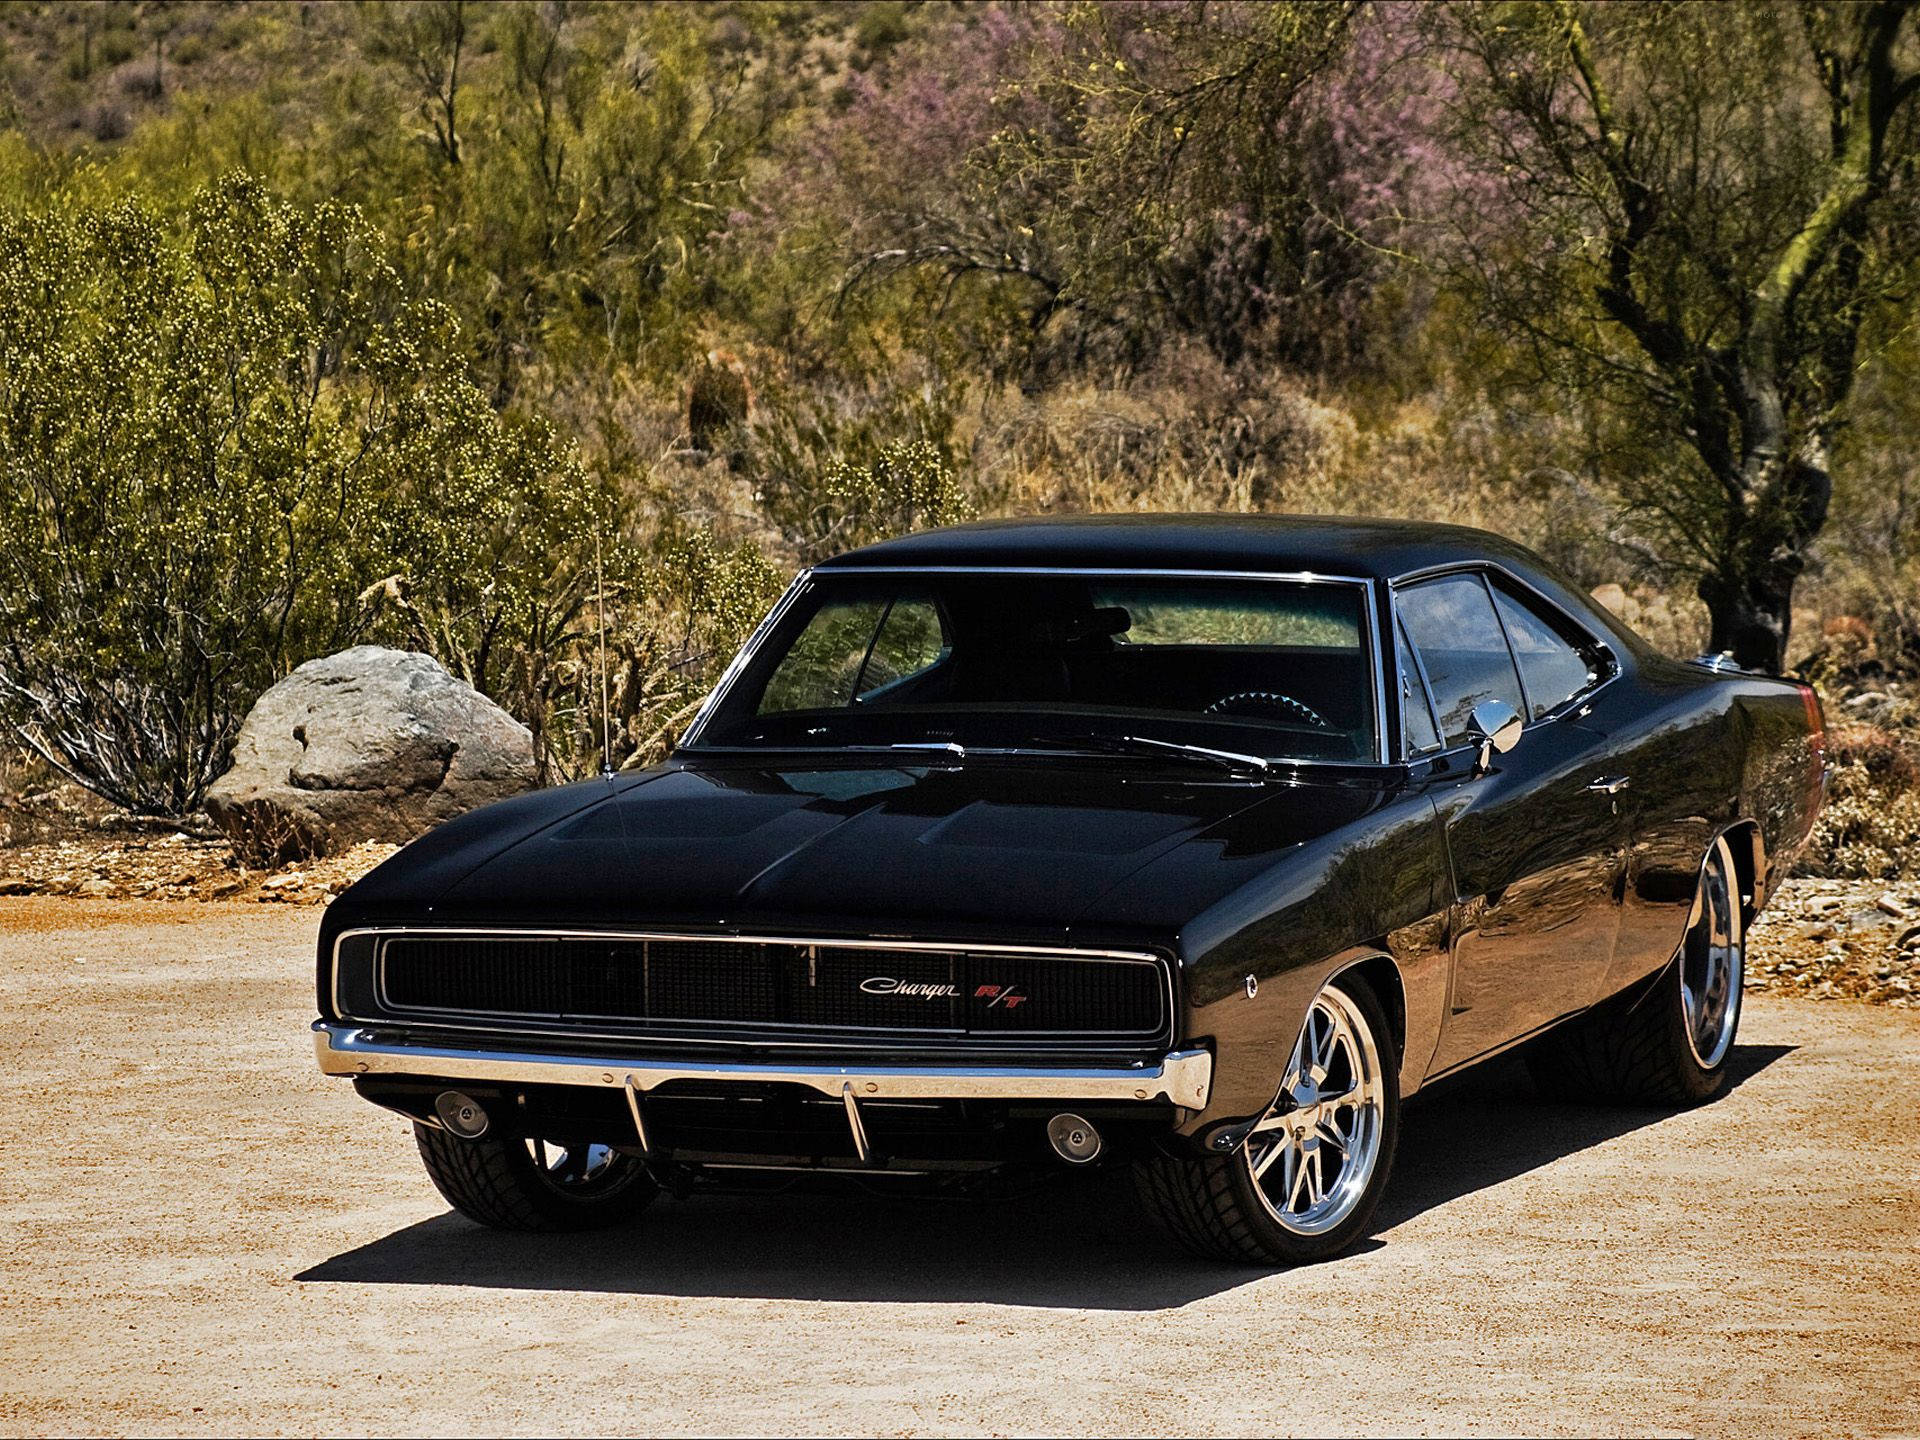 Dodgecharger R/t Muscle Car Would Be Translated To Swedish As 